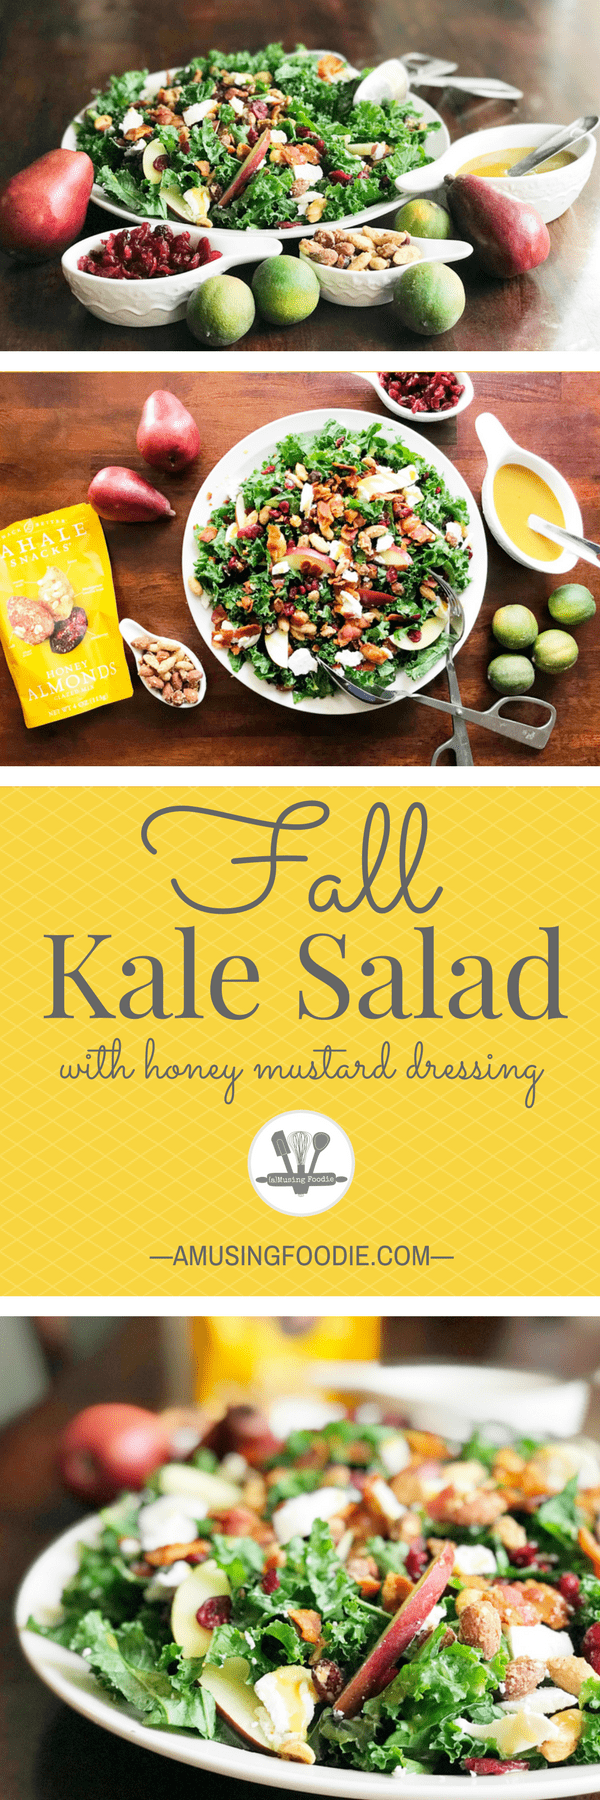 Kale Salad With Honey Mustard Dressing - (a)Musing Foodie